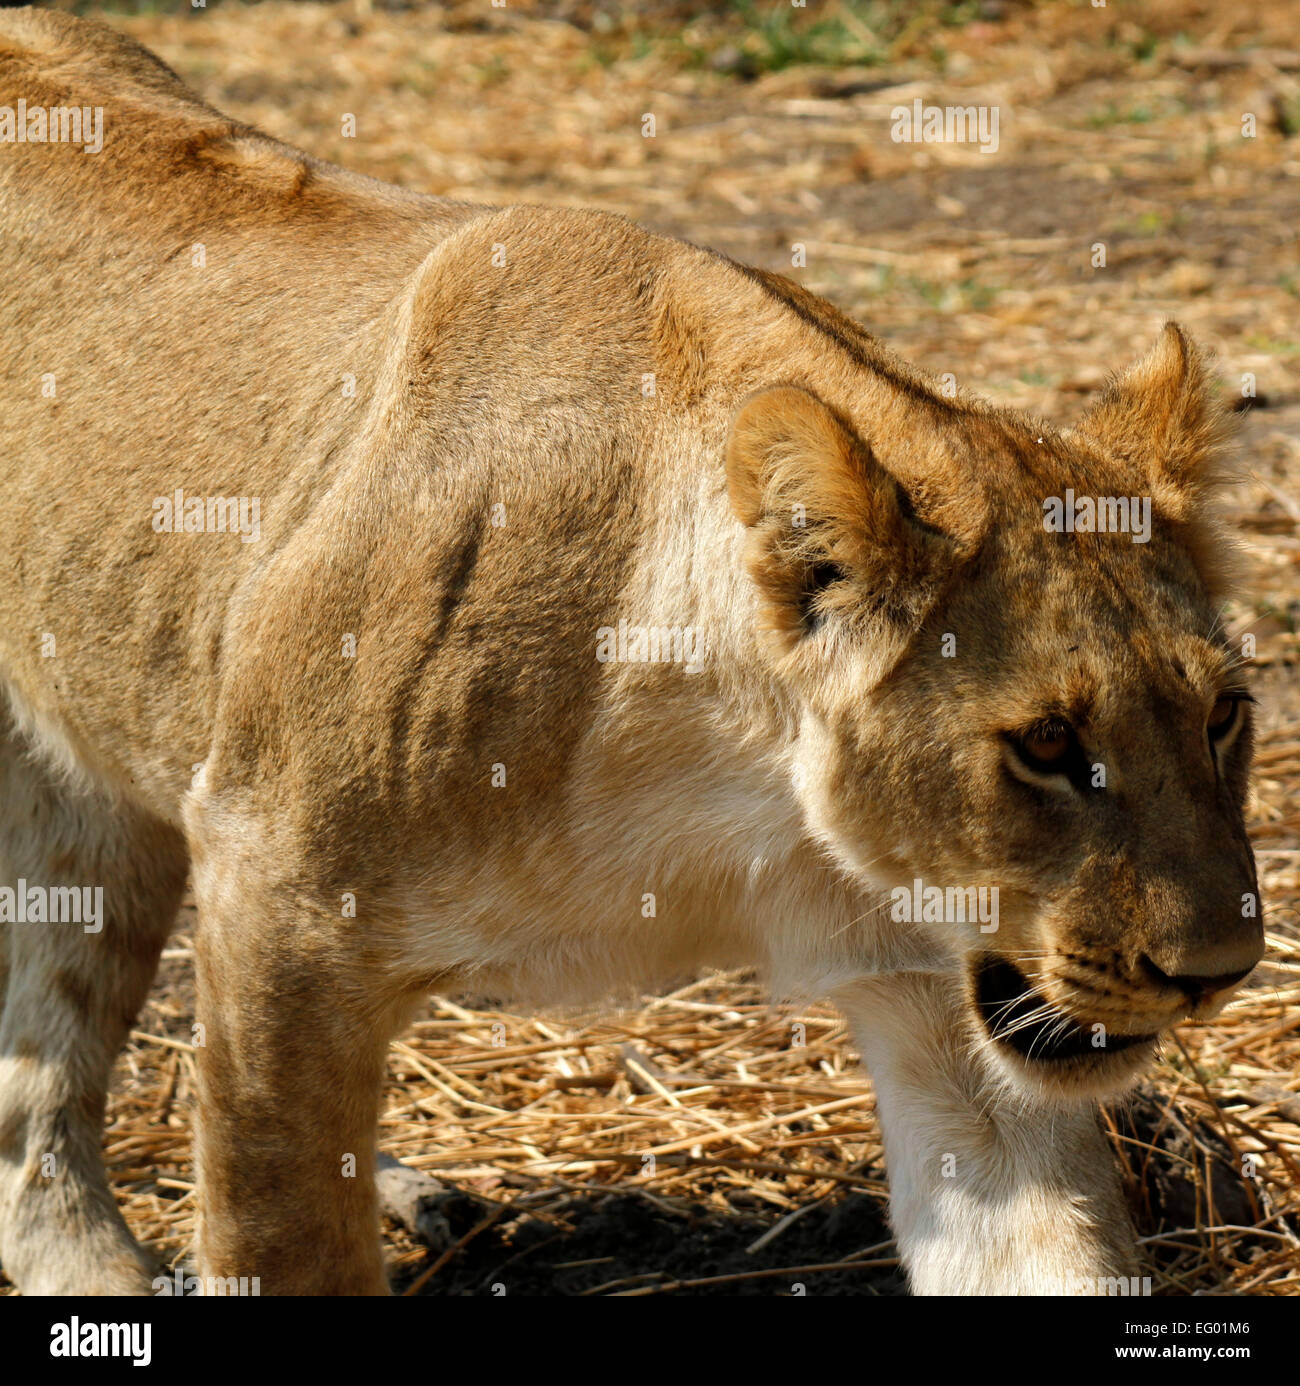 Square picture of an African Lioness close up, walking in the sunshine on a hot arid day looking for prey animals Stock Photo